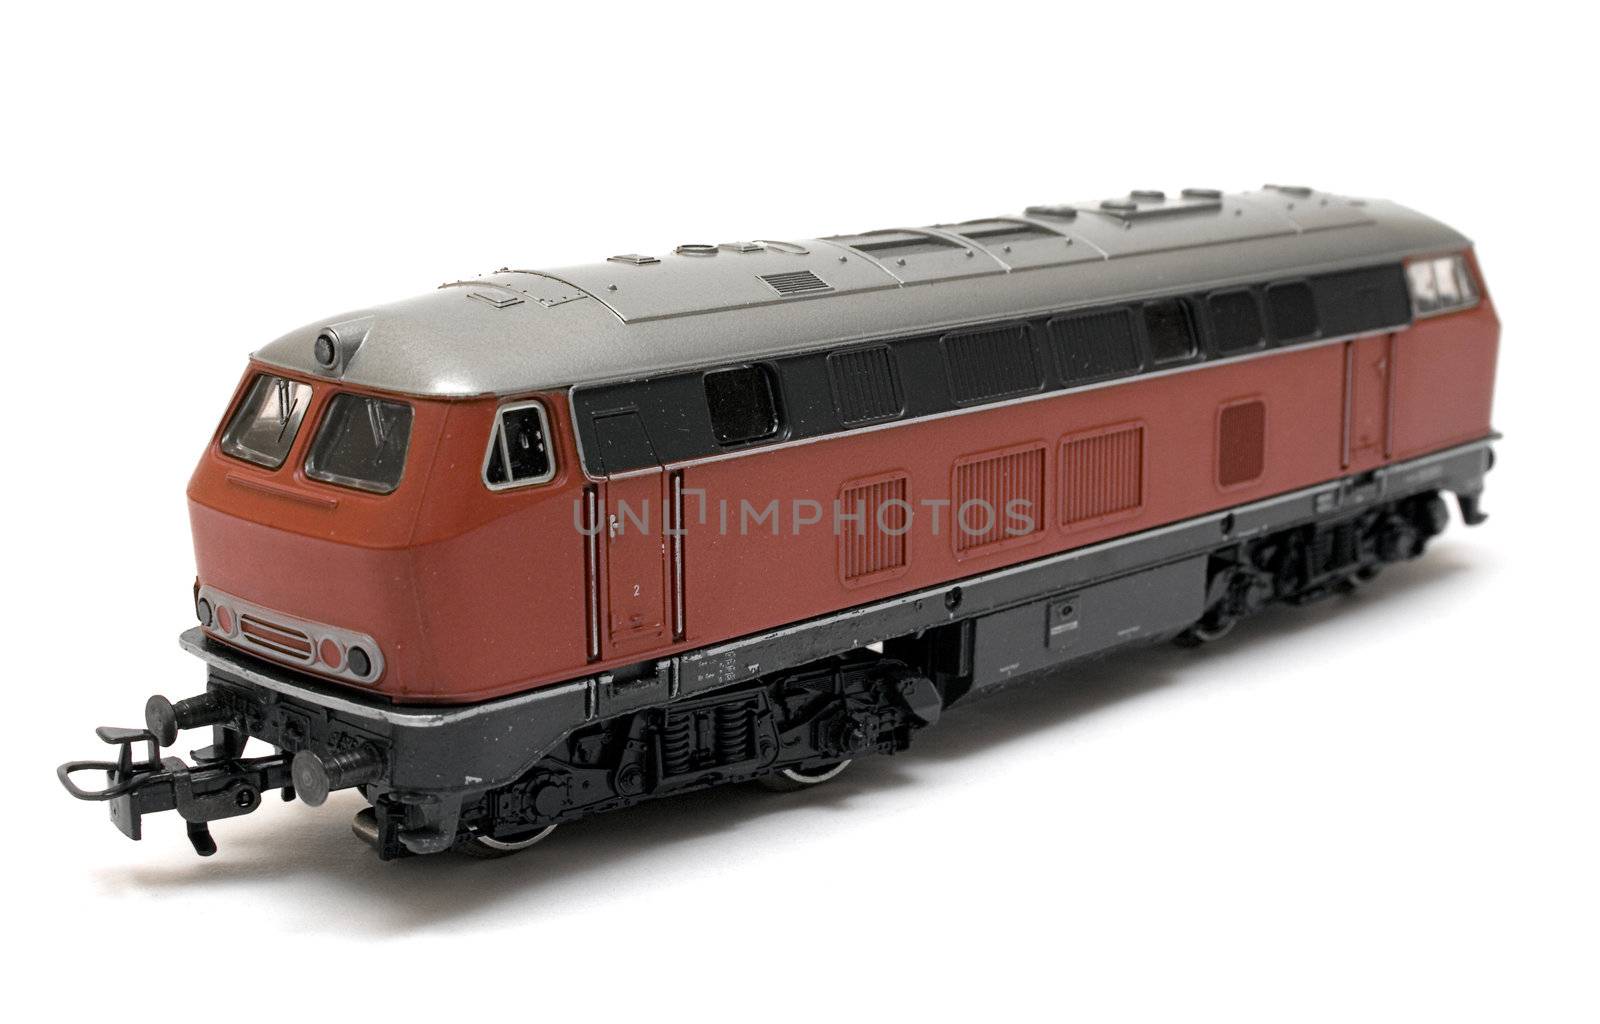 Model of a railway car isolated on a white background.